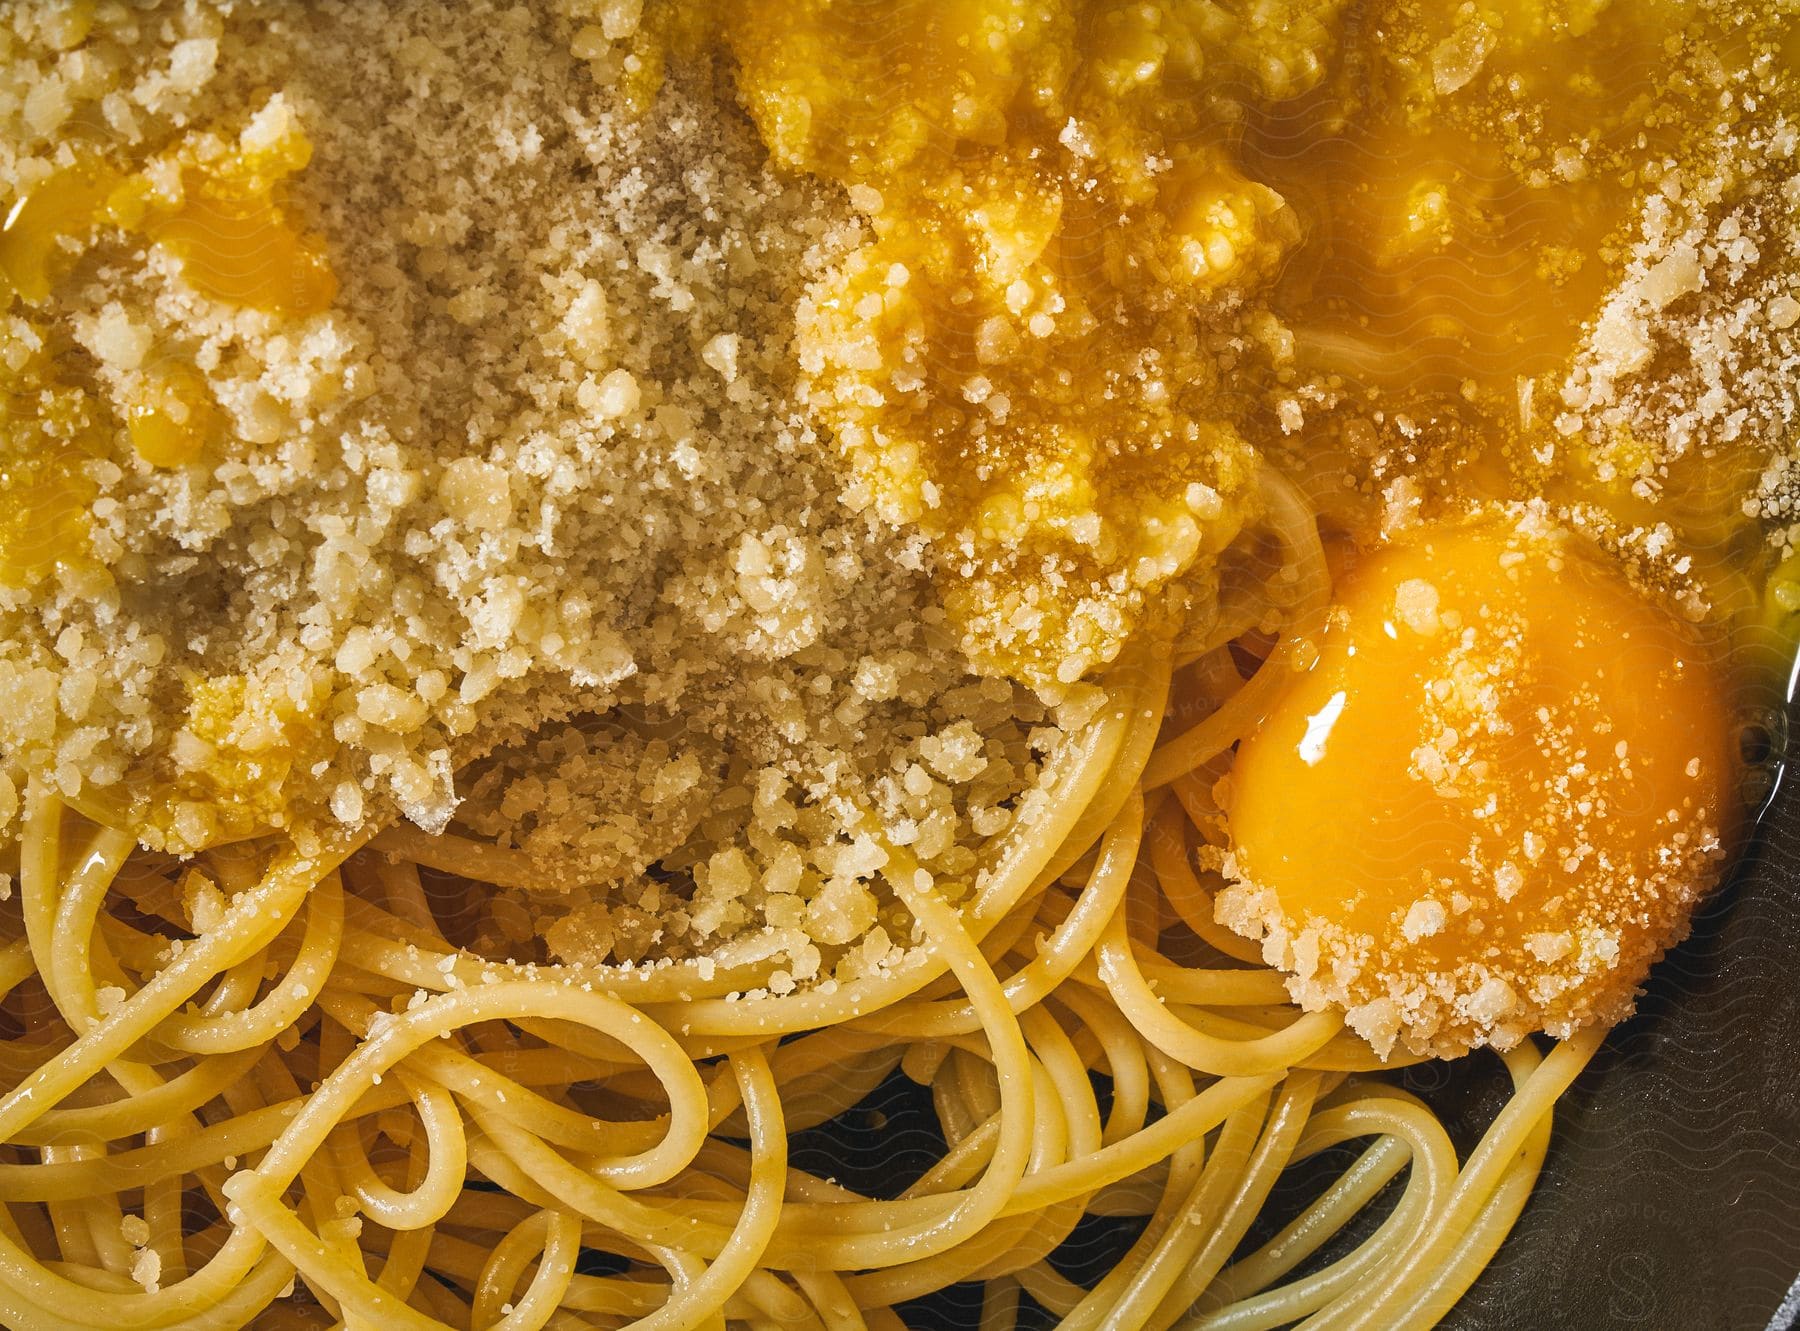 A plate of spaghetti noodles covered with a raw egg and bread crumbs